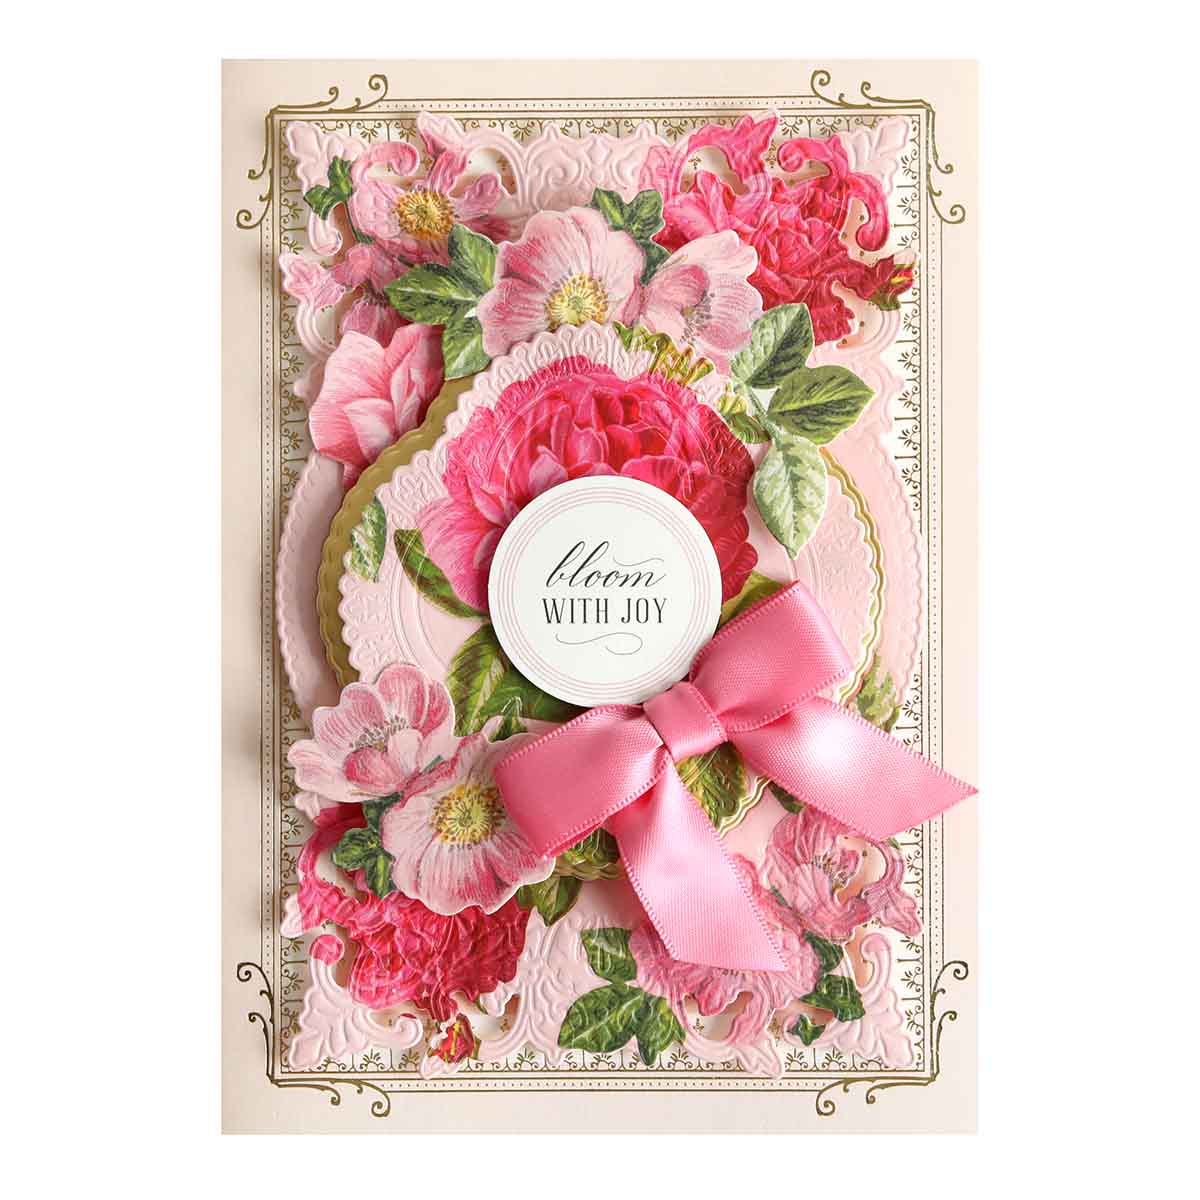 a card with pink flowers and a ribbon.